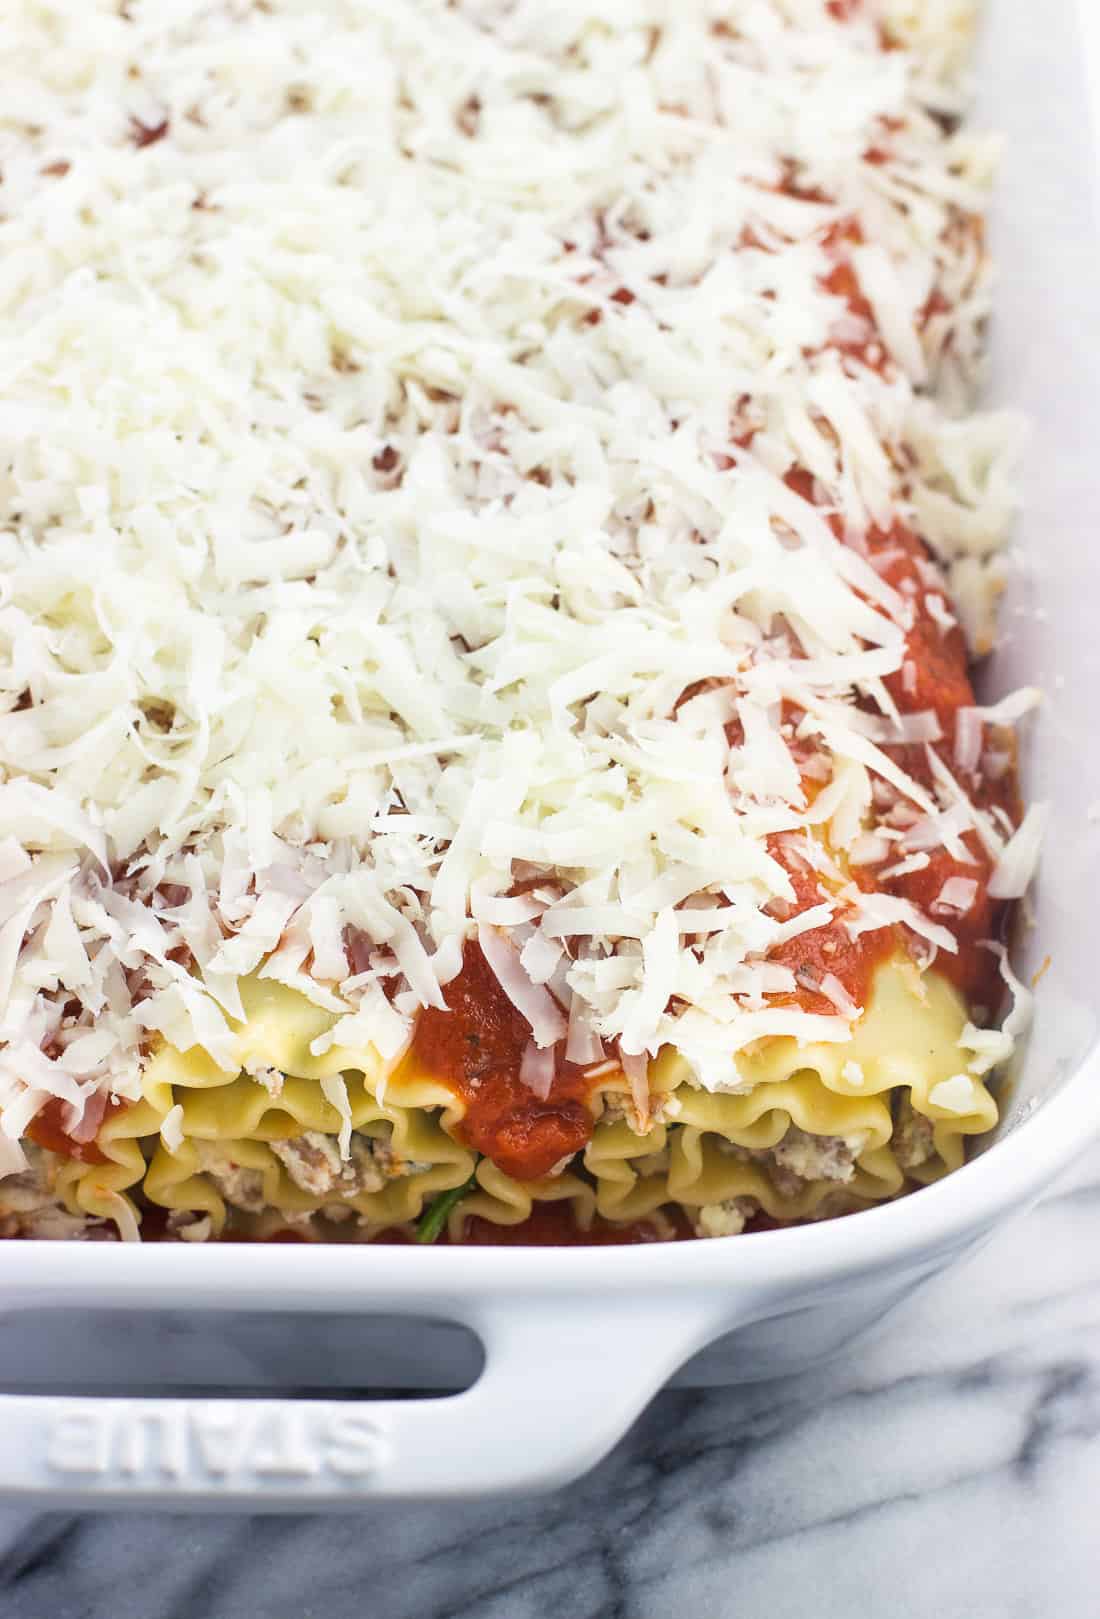 Spinach lasagna rolls in a large ceramic baking dish covered in marinara sauce and shredded mozzarella cheese